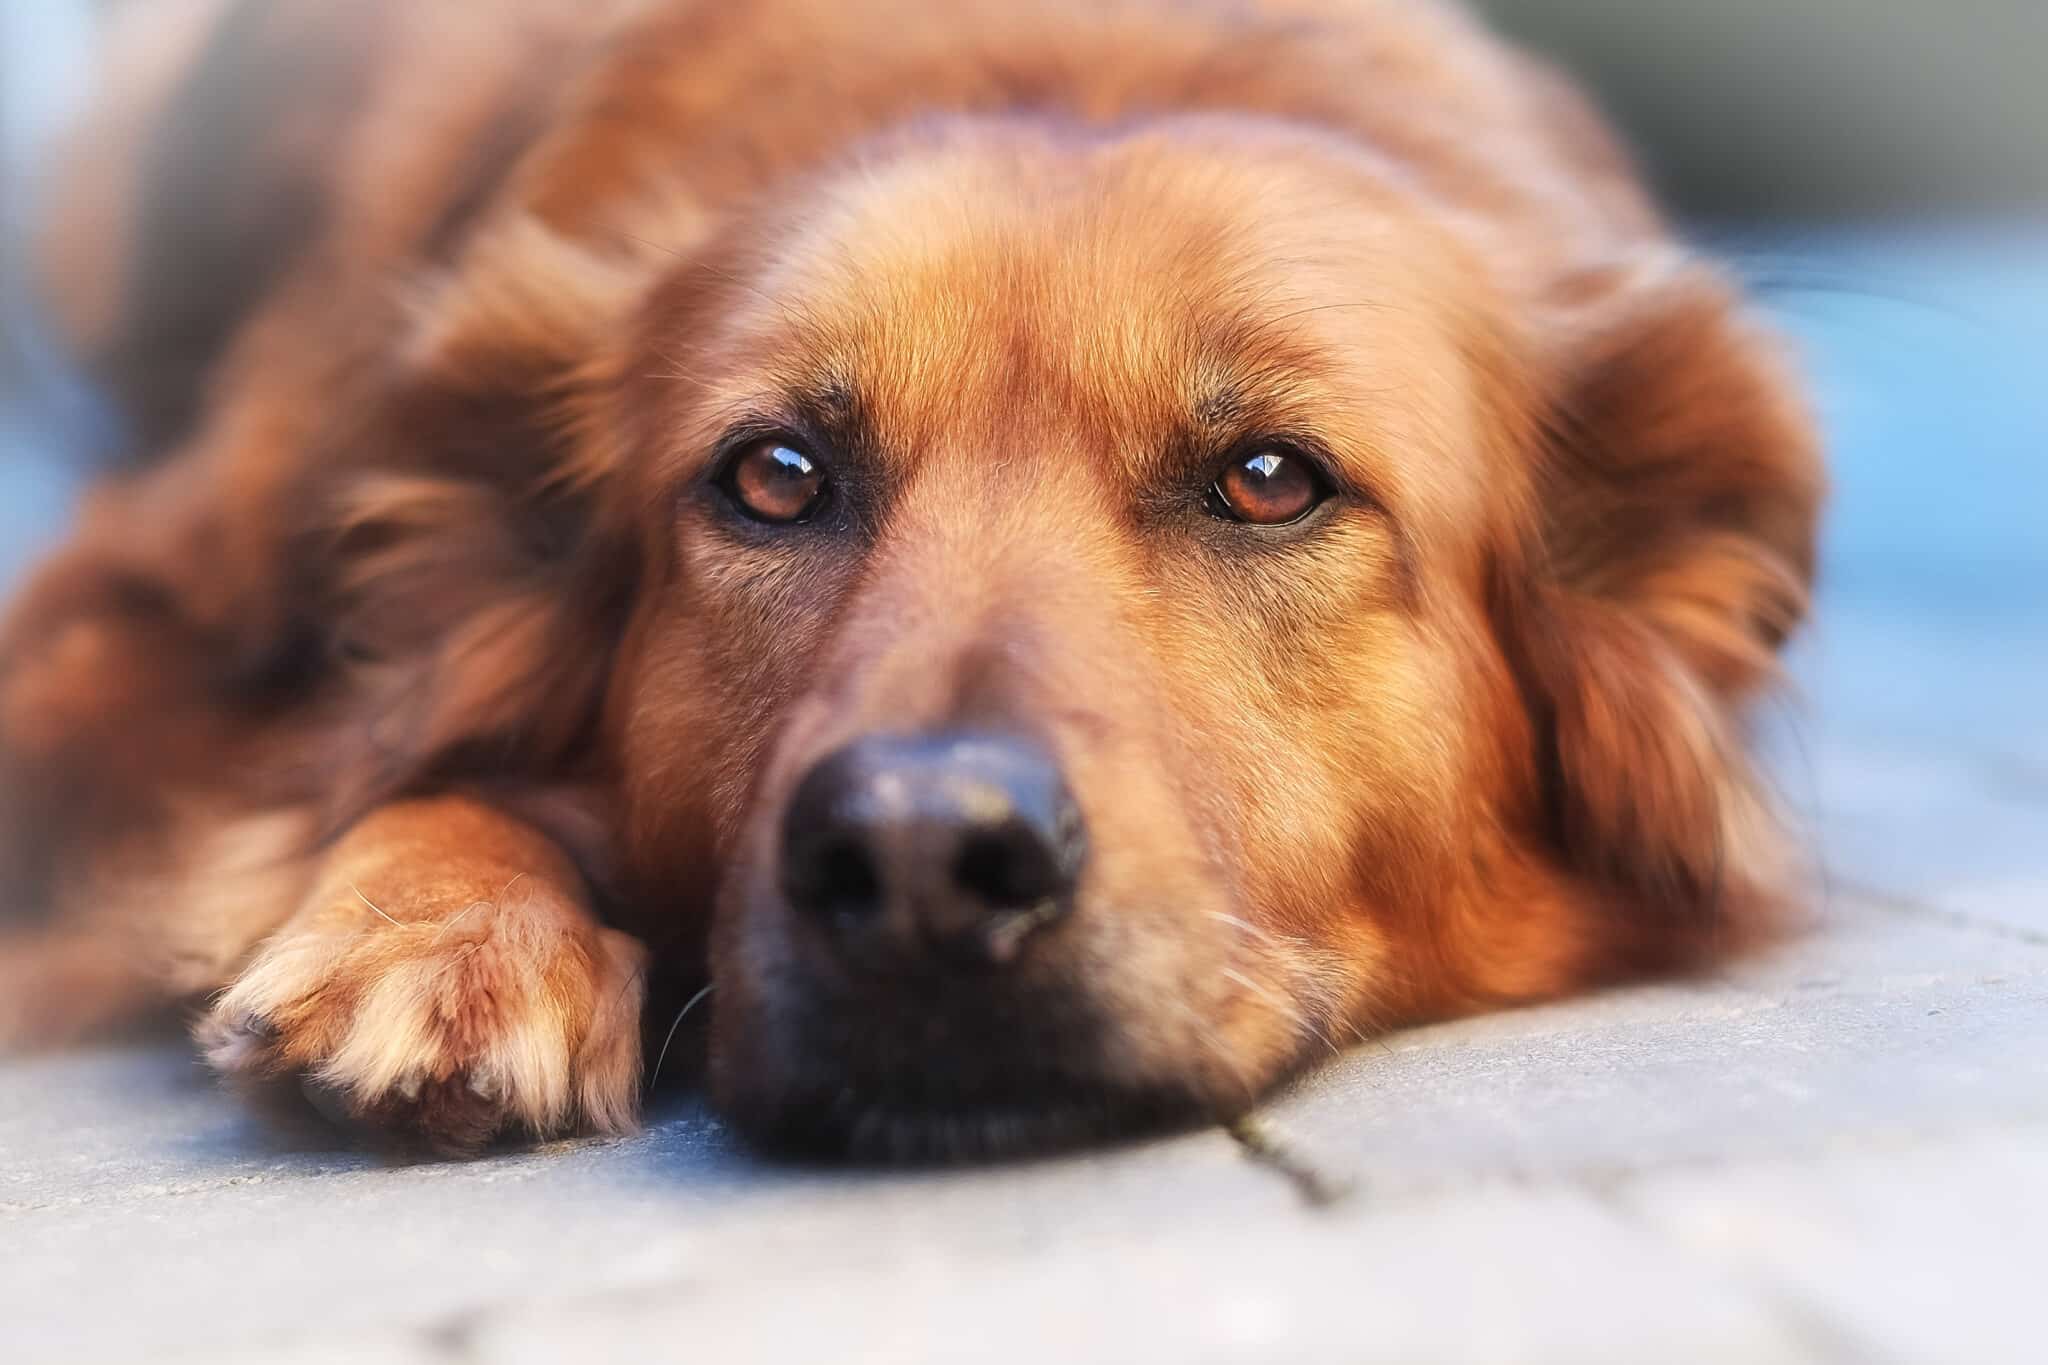 Relaxed mixed-breed dog looking directly at the camera.